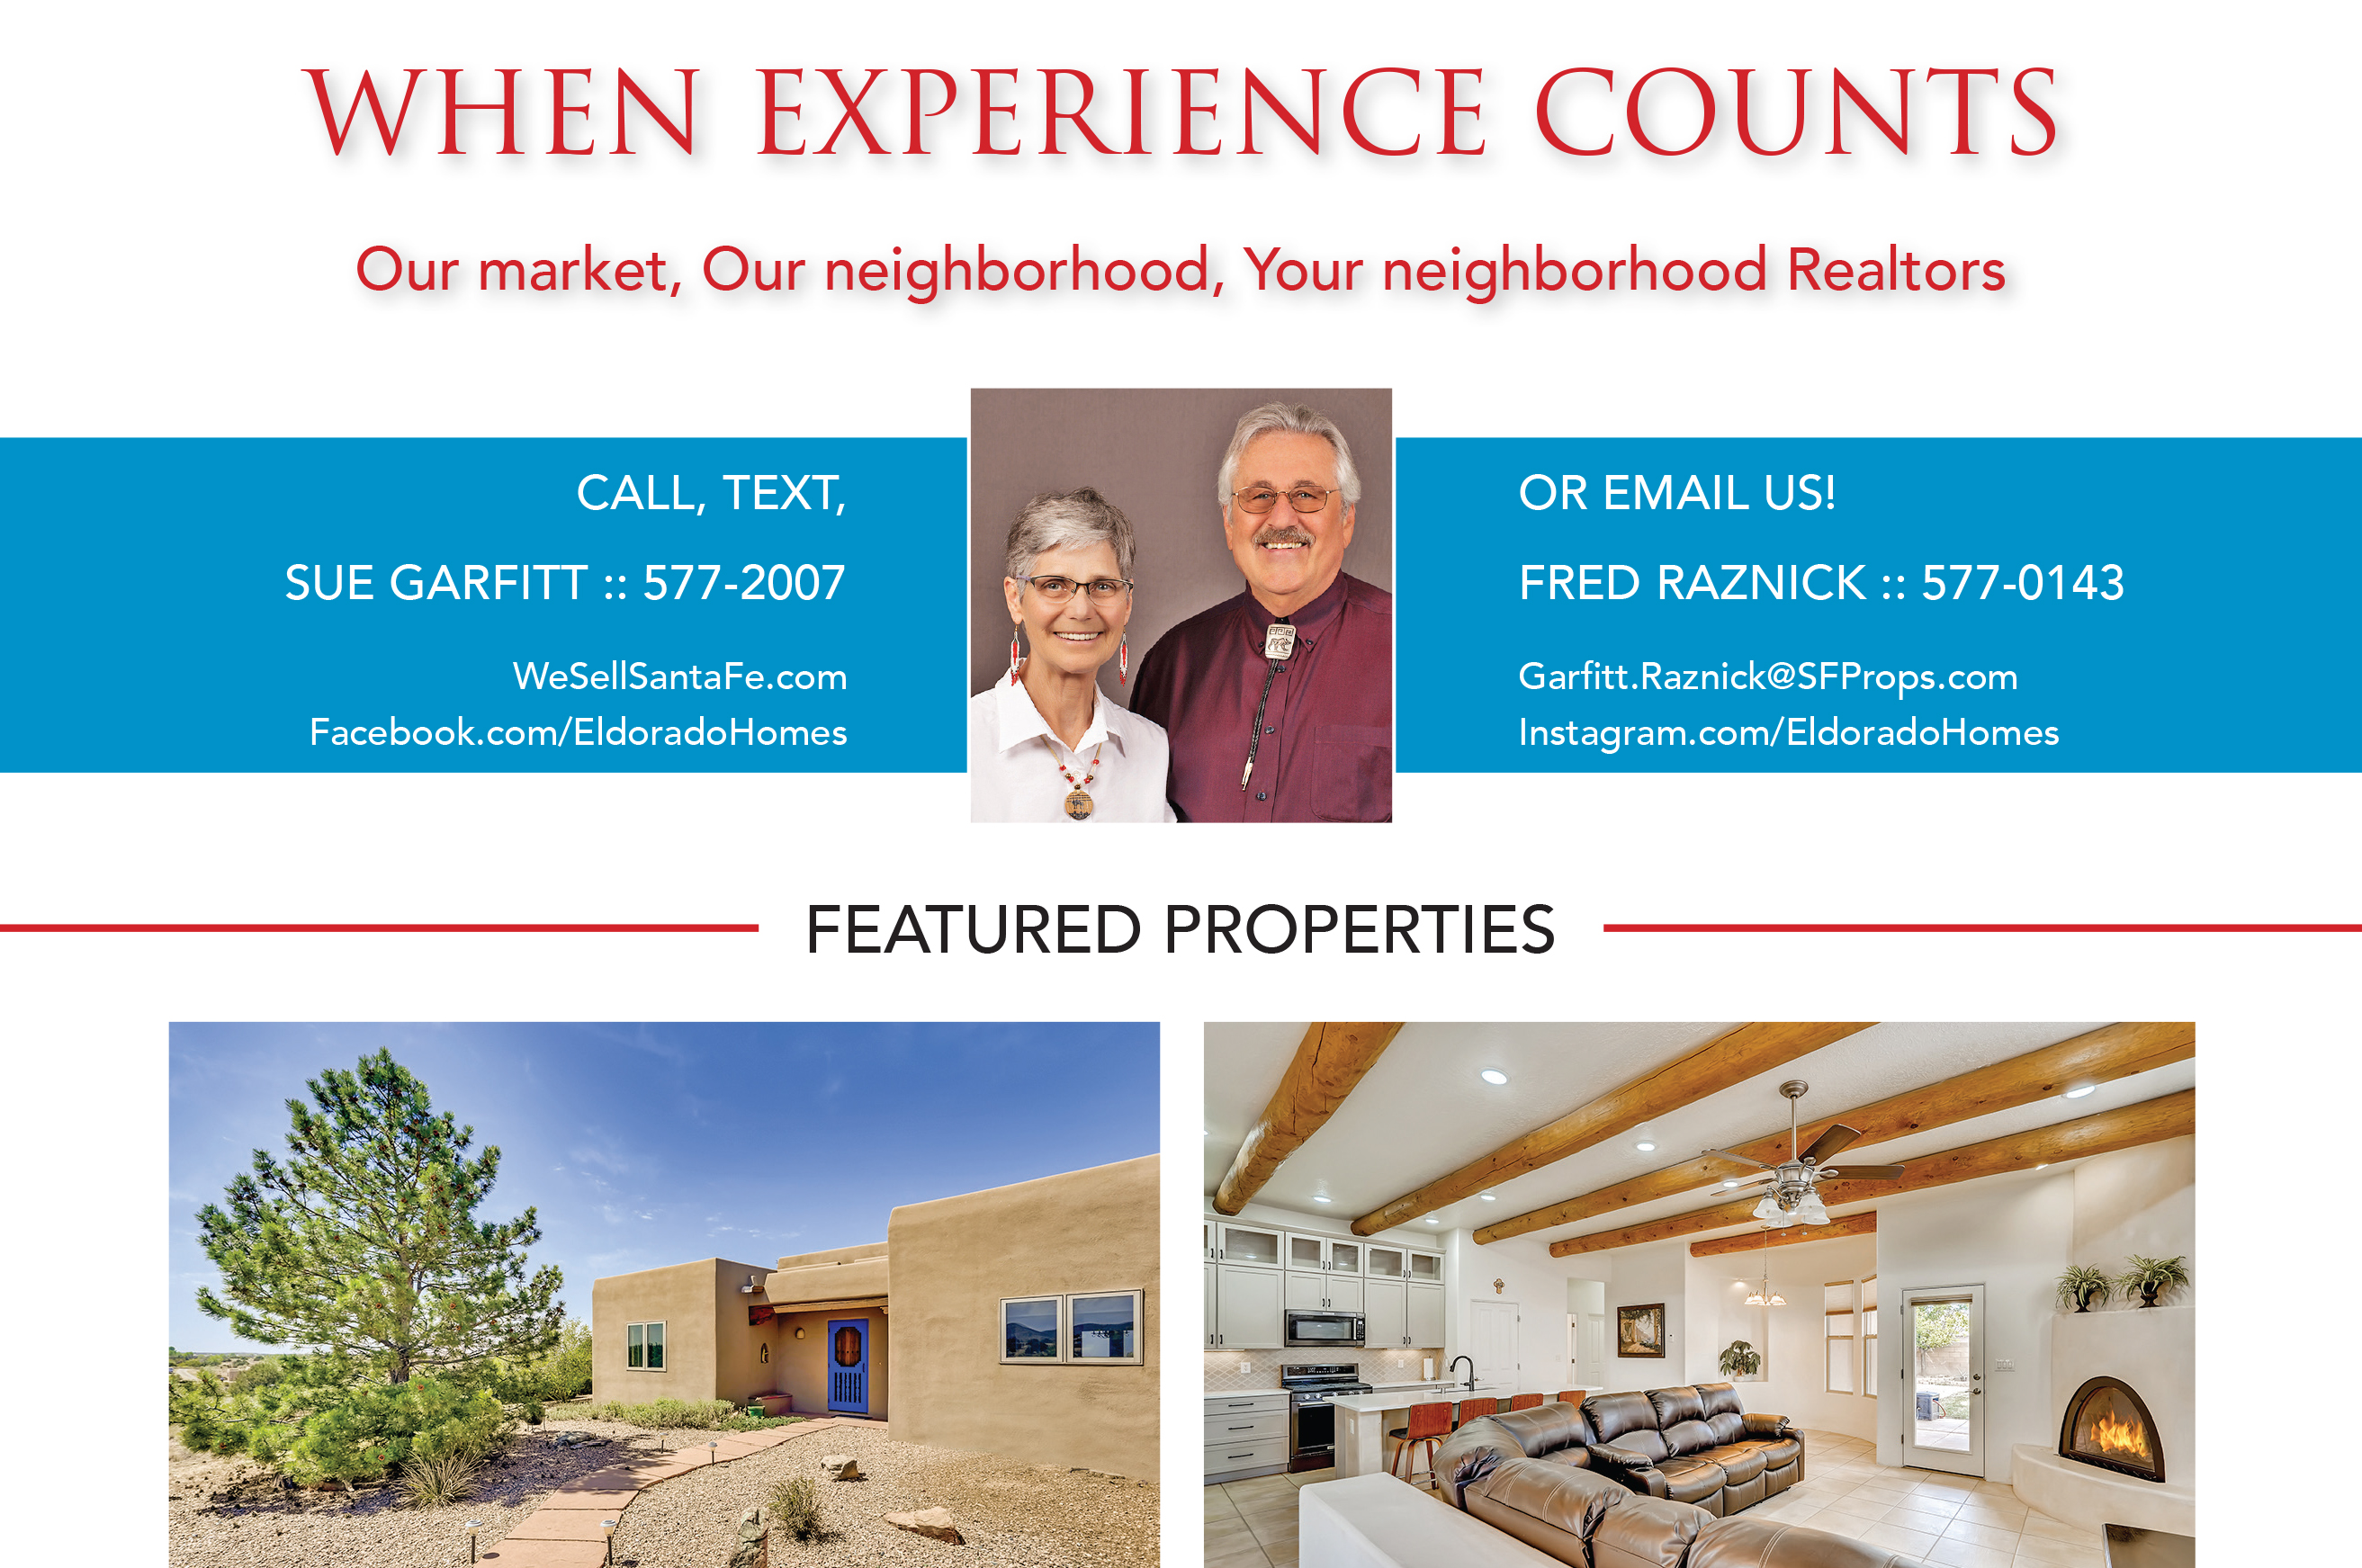 Did you see our ad in the July issue of Eldorado Living? 